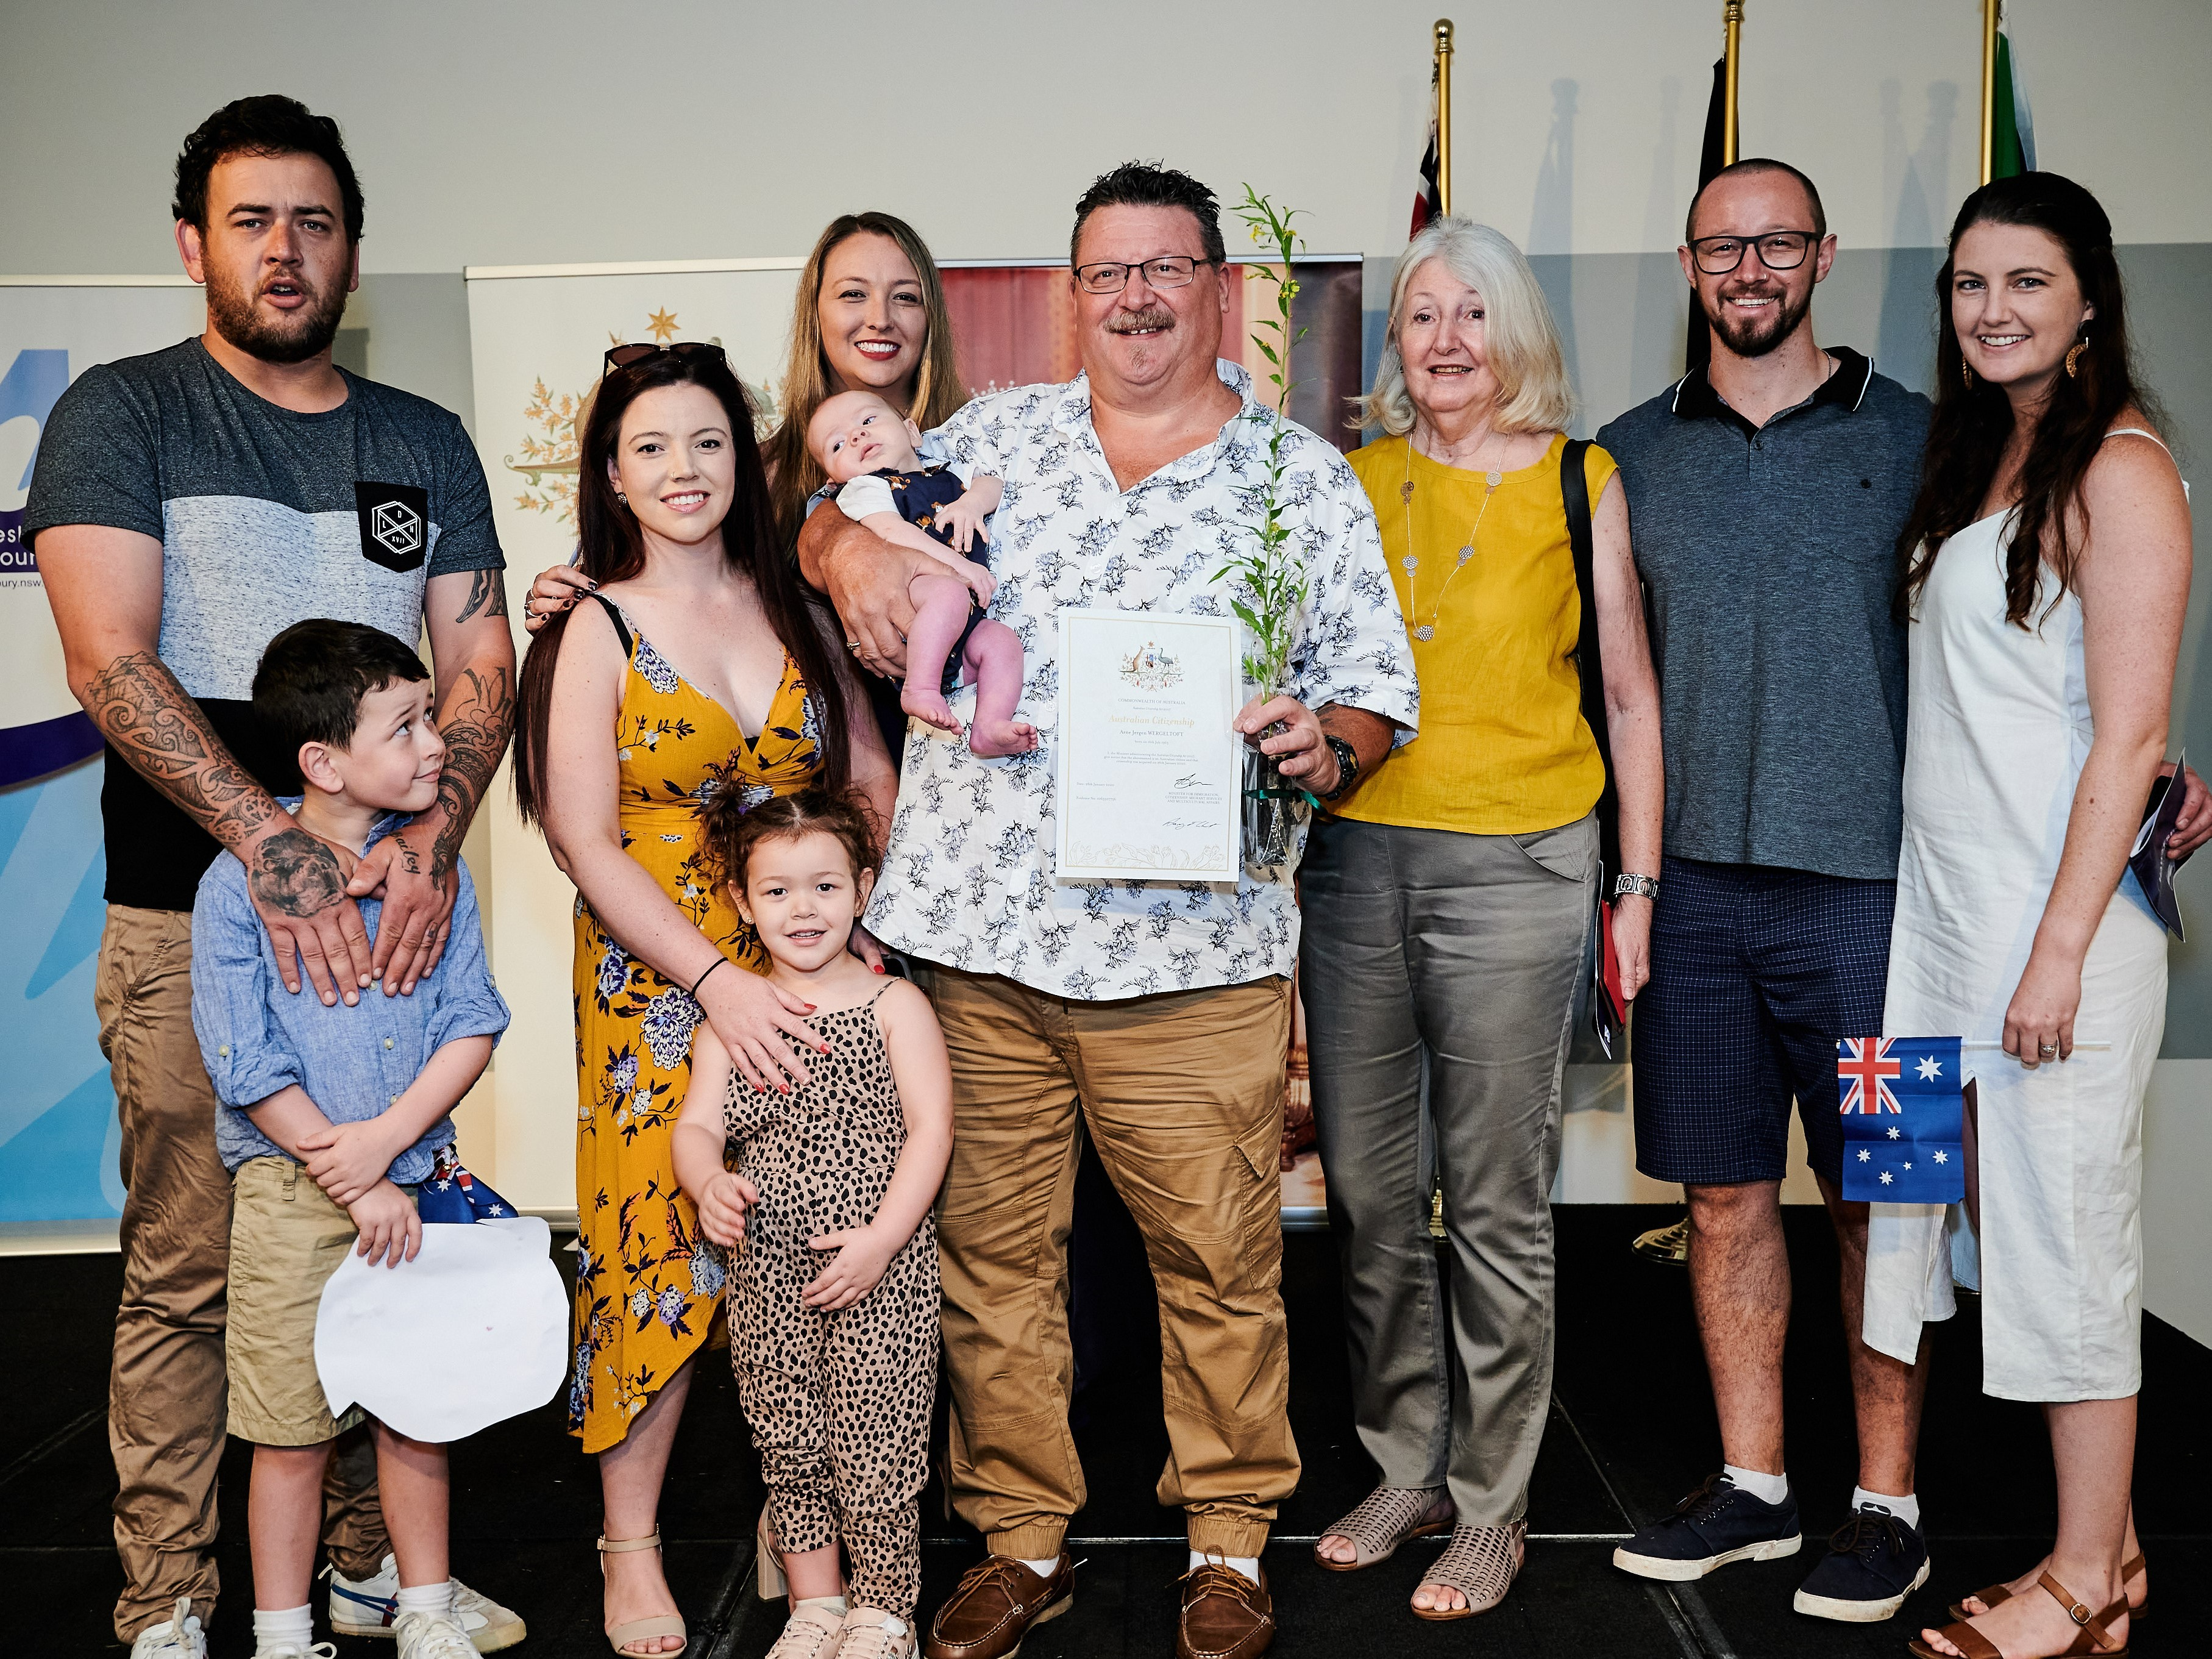 Hawkesbury Citizenship Ceremony 2020 - Australian Citizenship is a often a family event